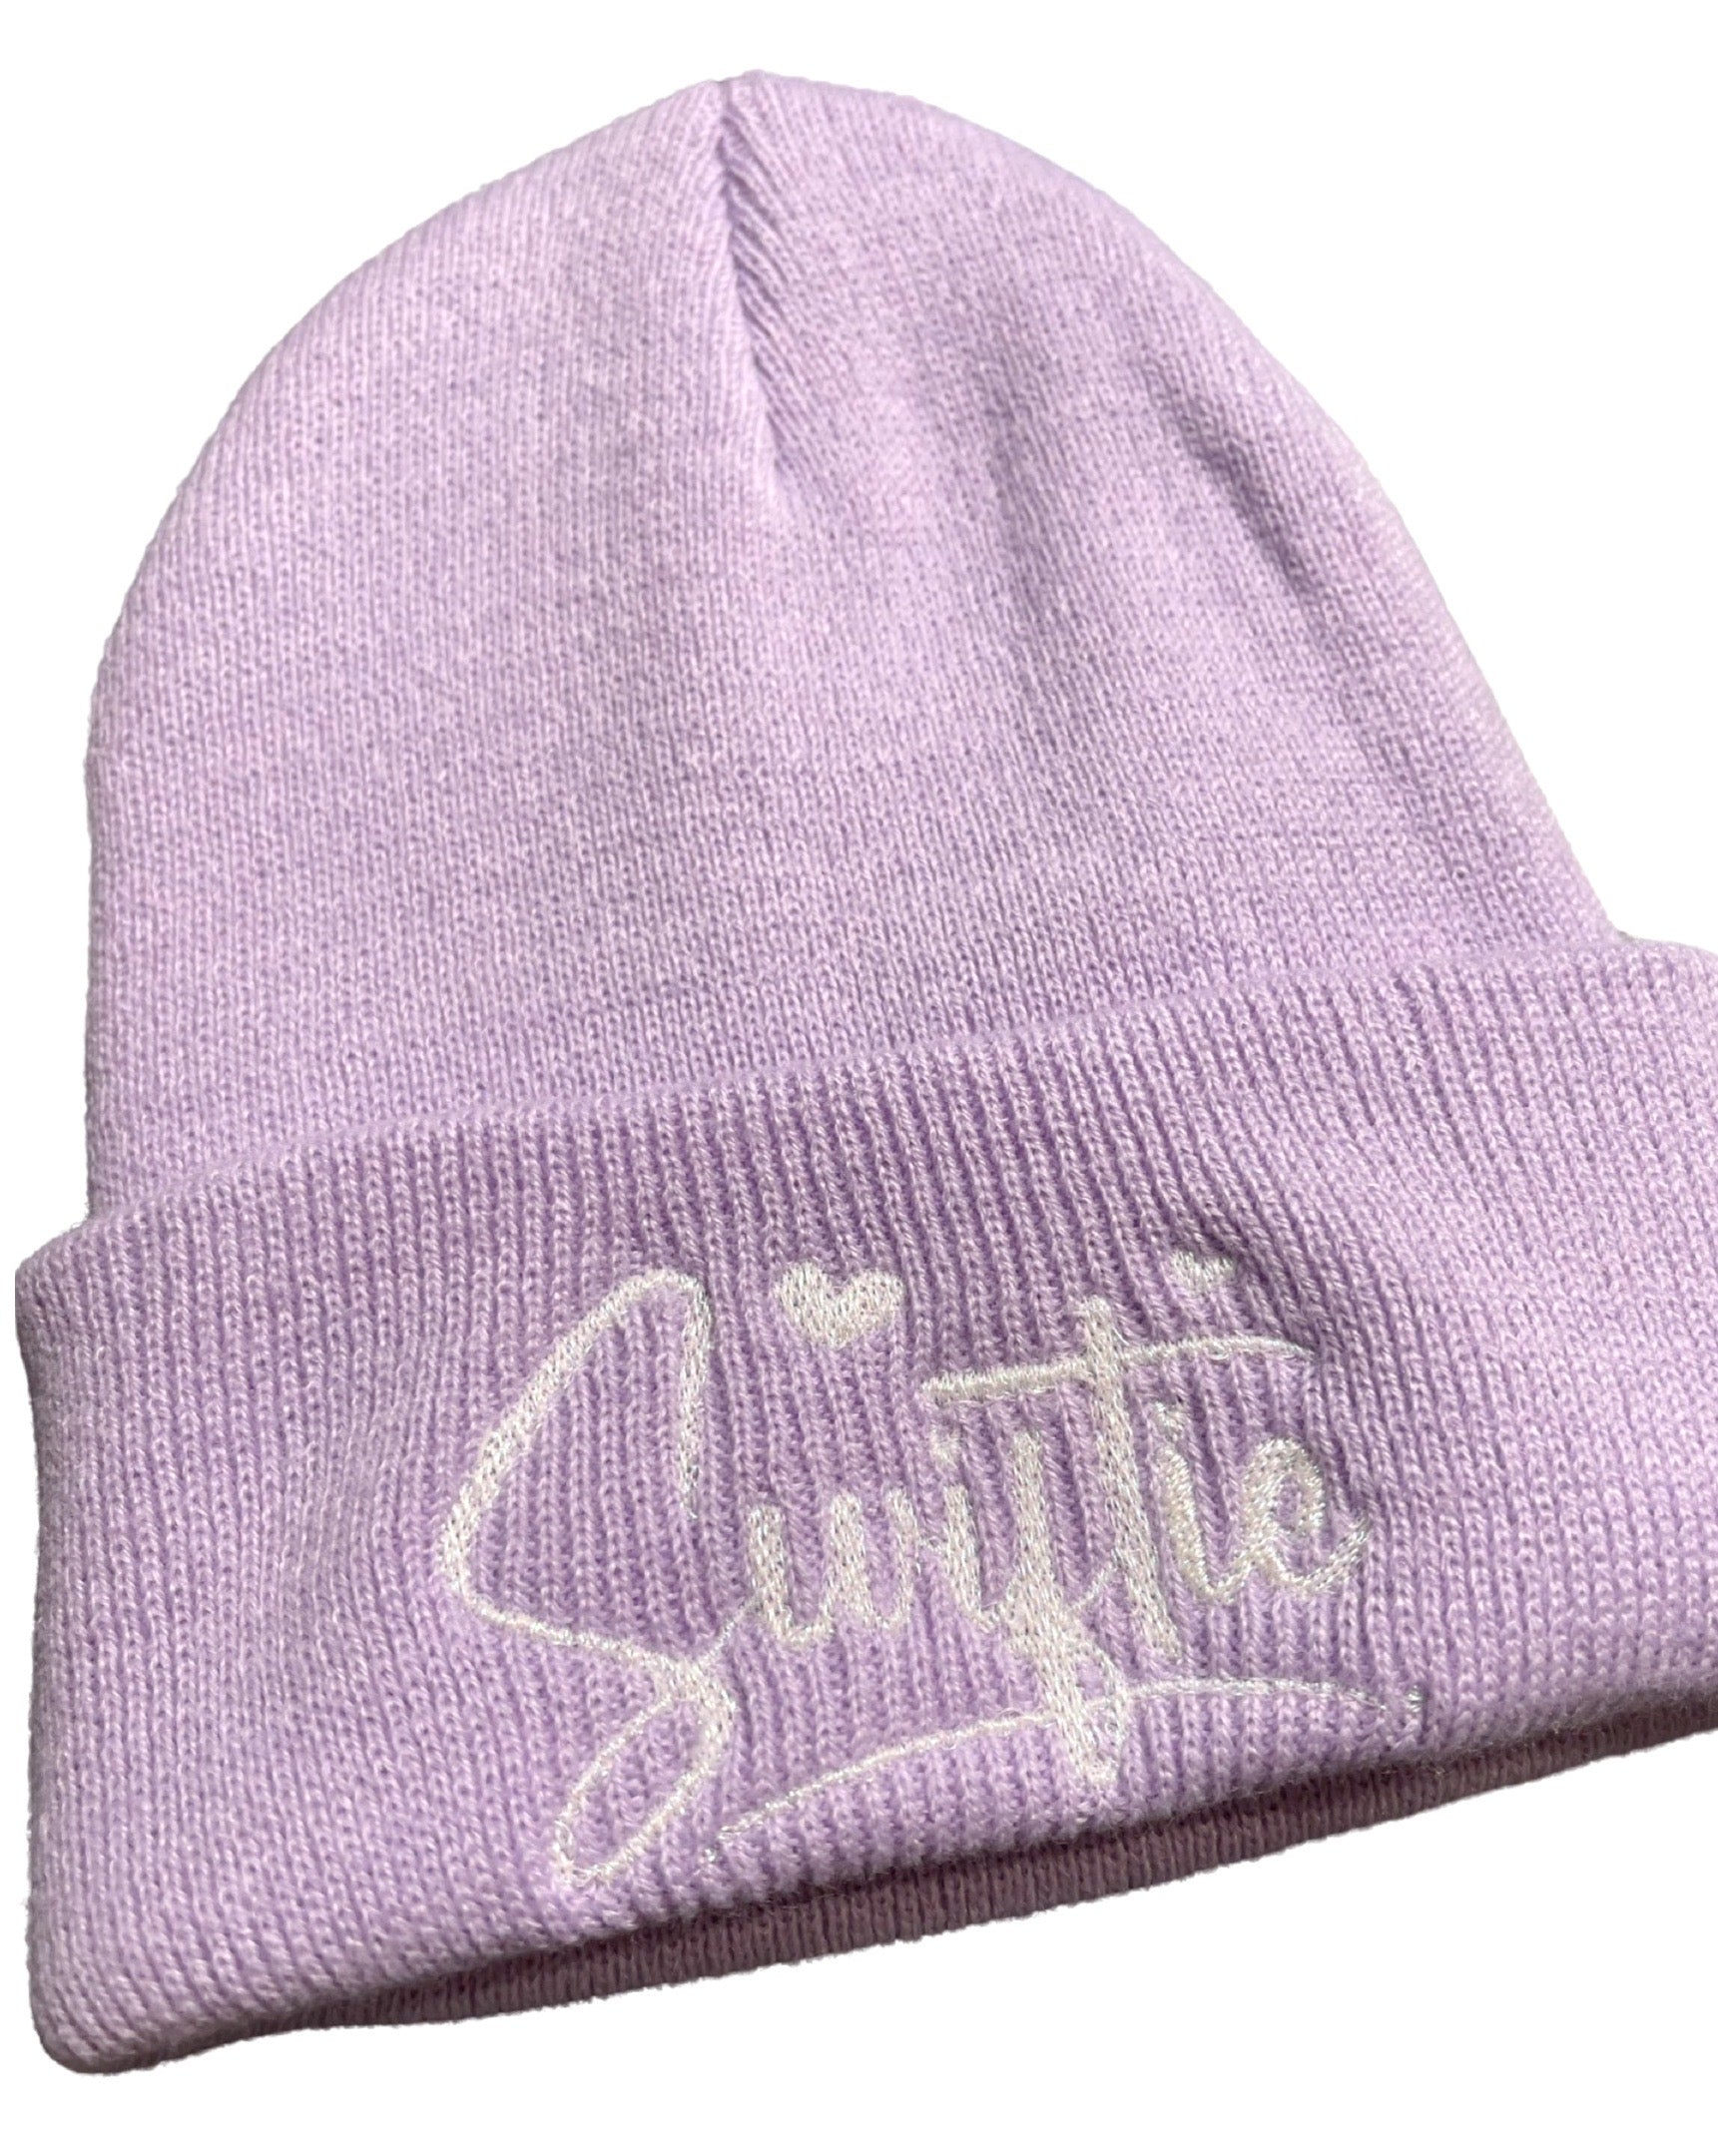 Lavender (light purple) knit beanie embroidered with the word "swiftie" in cursive with hearts for the dots on the I's. The embroidery is done with a white pearlized thread.